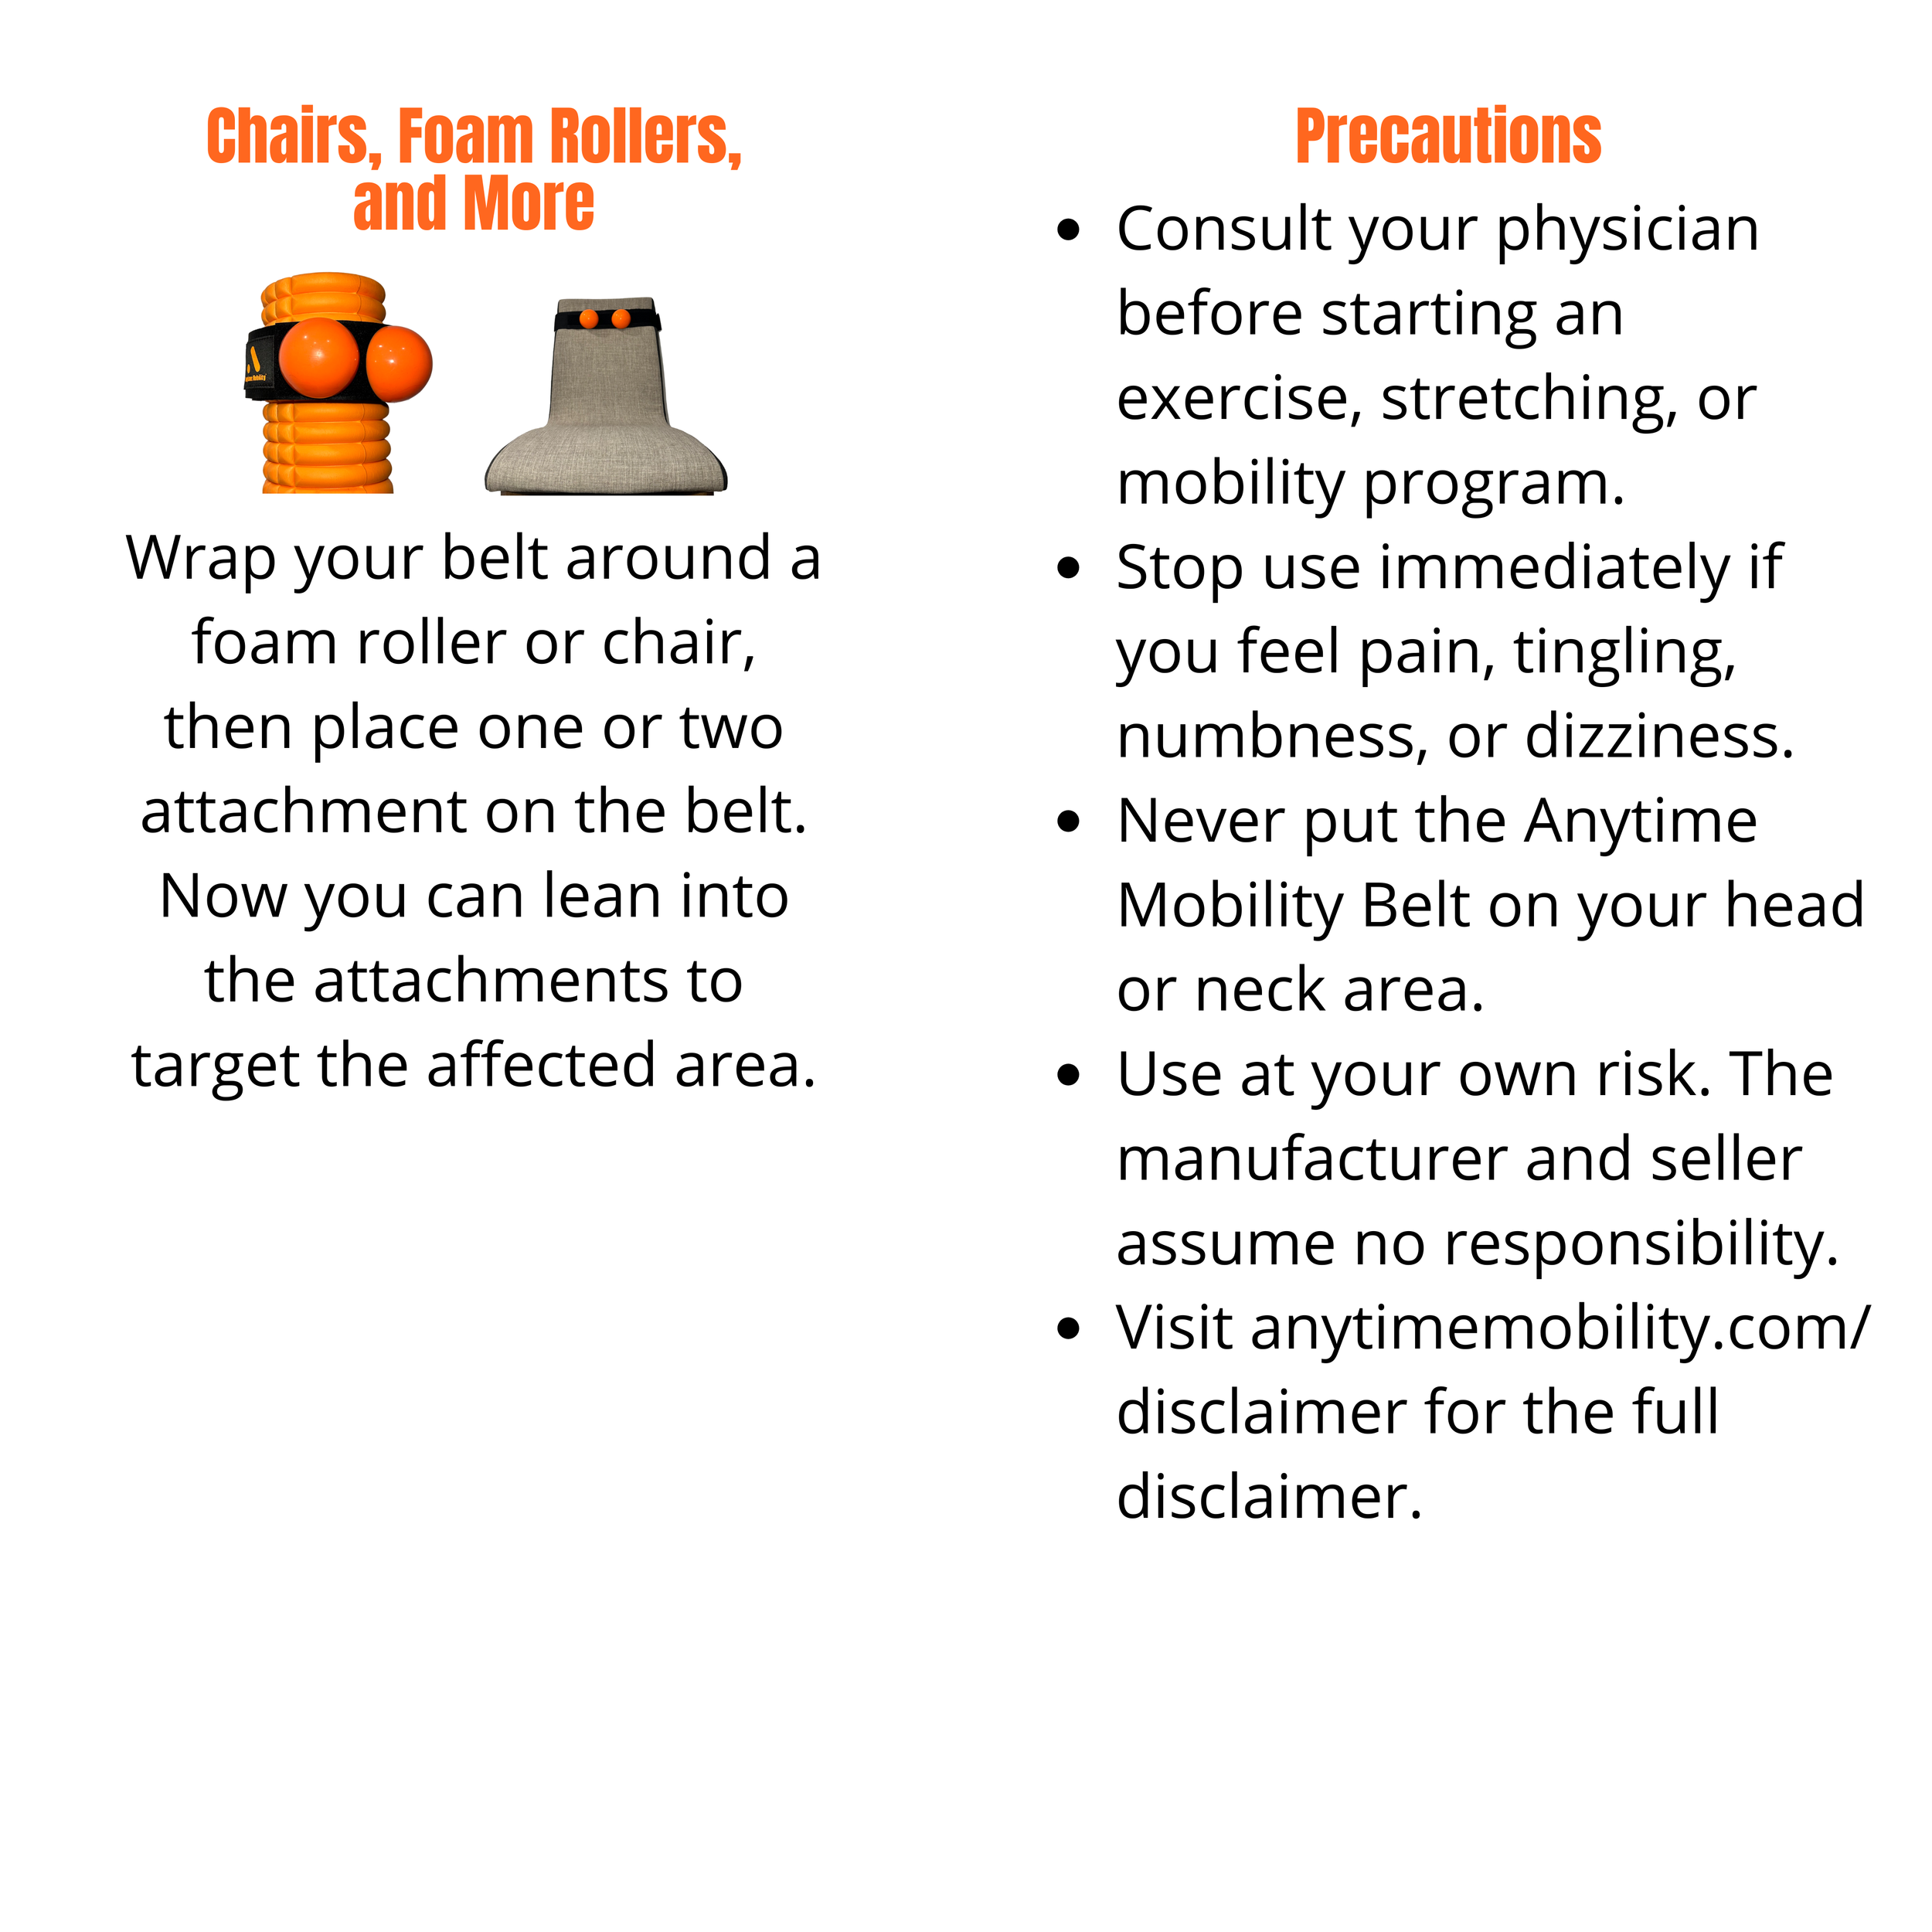 Anytime Mobility Belt How To Chairs Foam Rollers Precautions.png